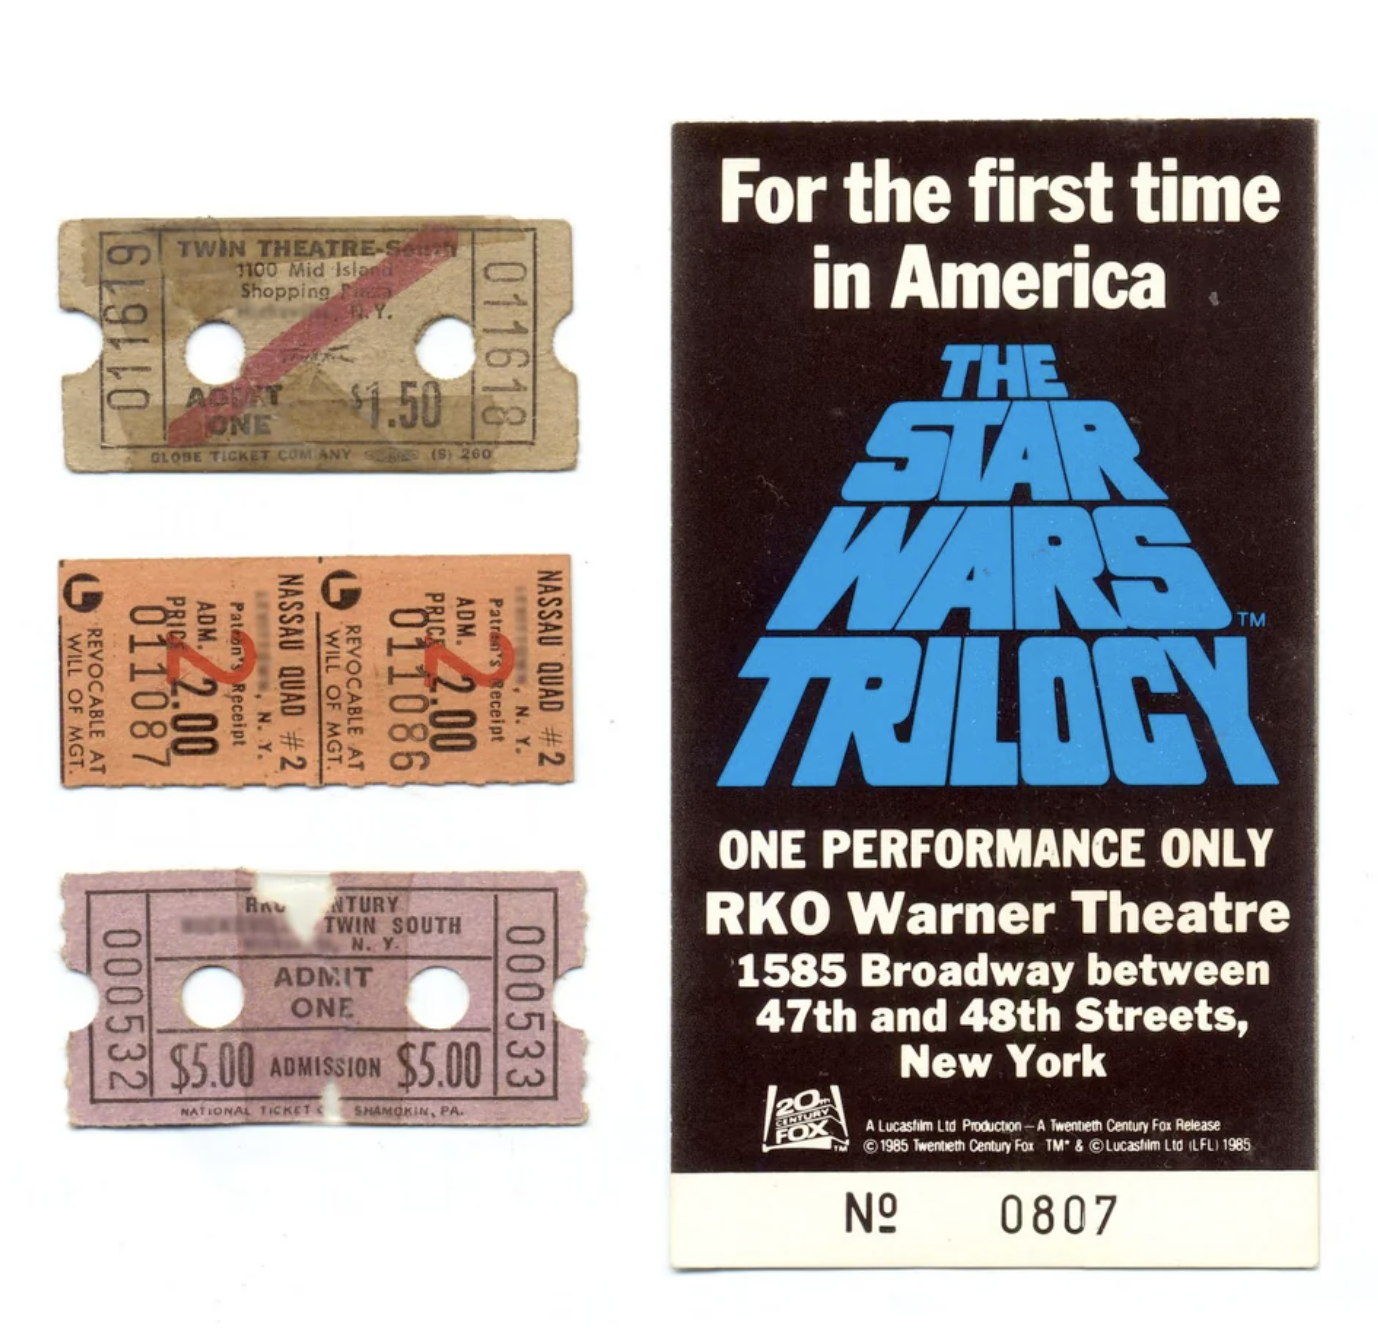 Scans of the original &quot;Star Wars&quot; trilogy movie ticket stubs are being shown